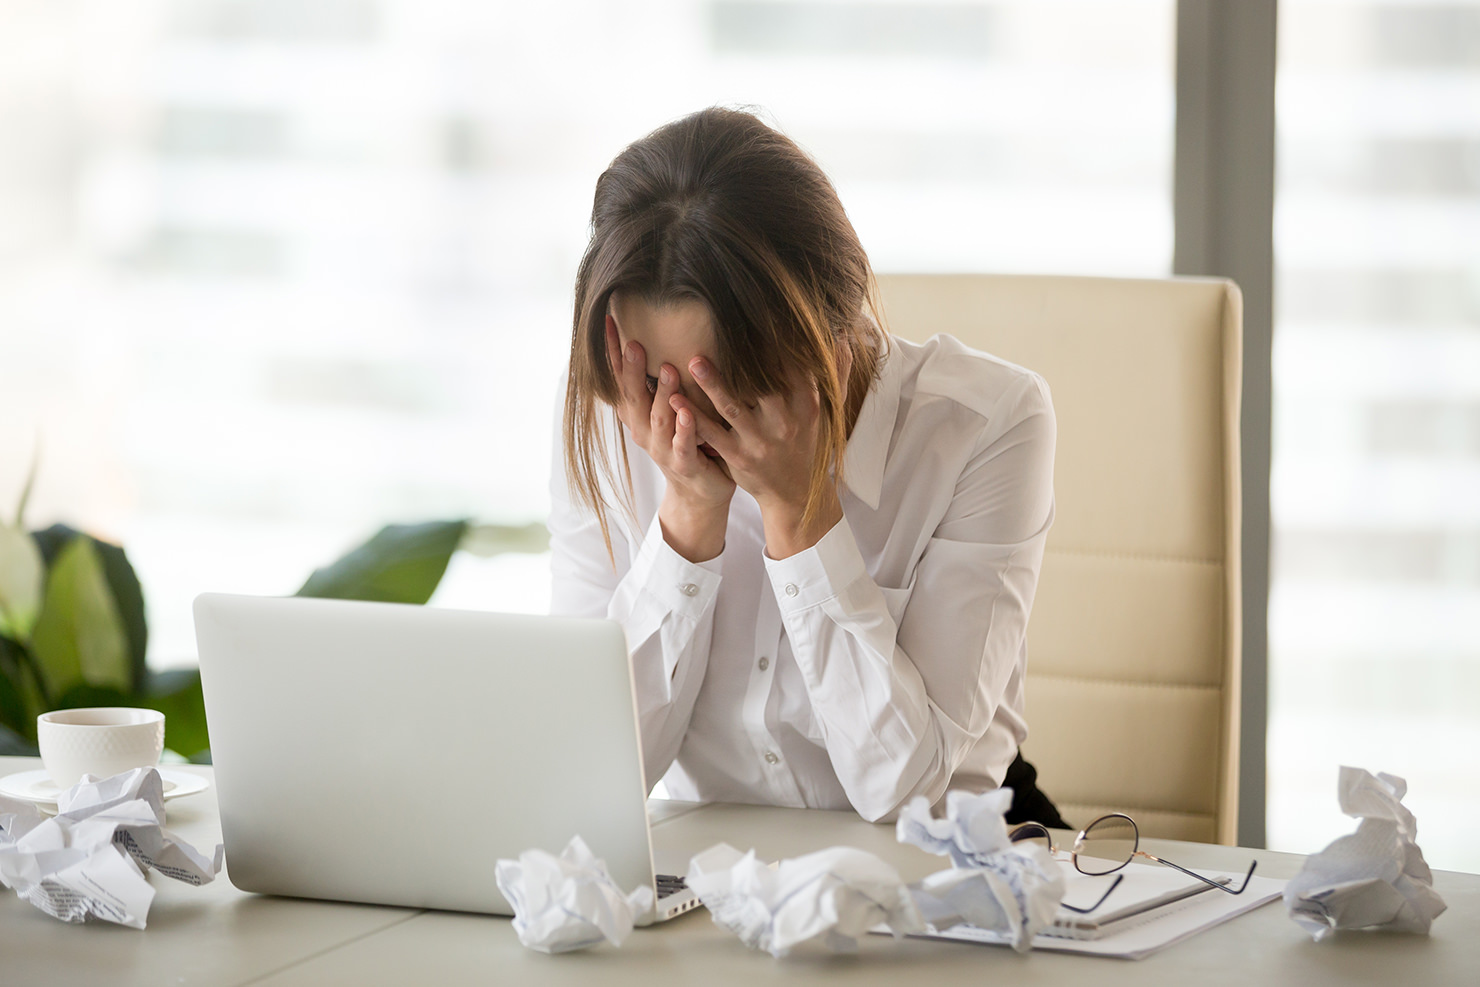 A woman stressed at her desk with crumpled paper.